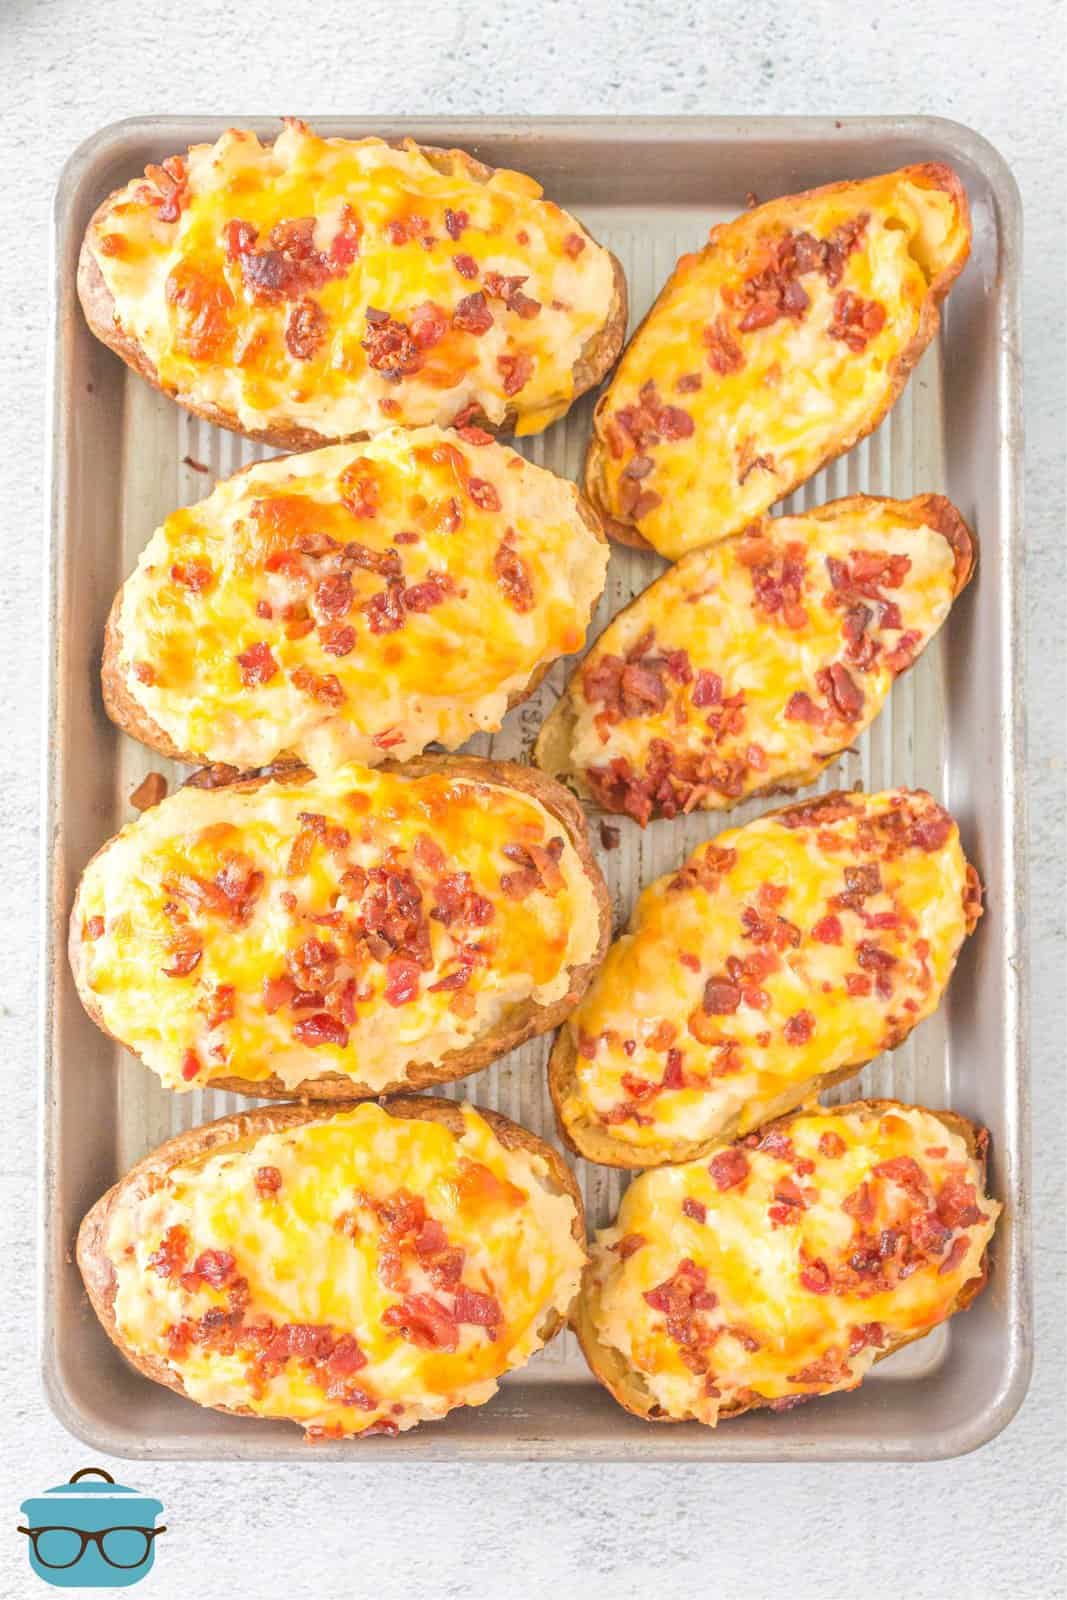 Grilled Twice Baked Potatoes on metal tray.